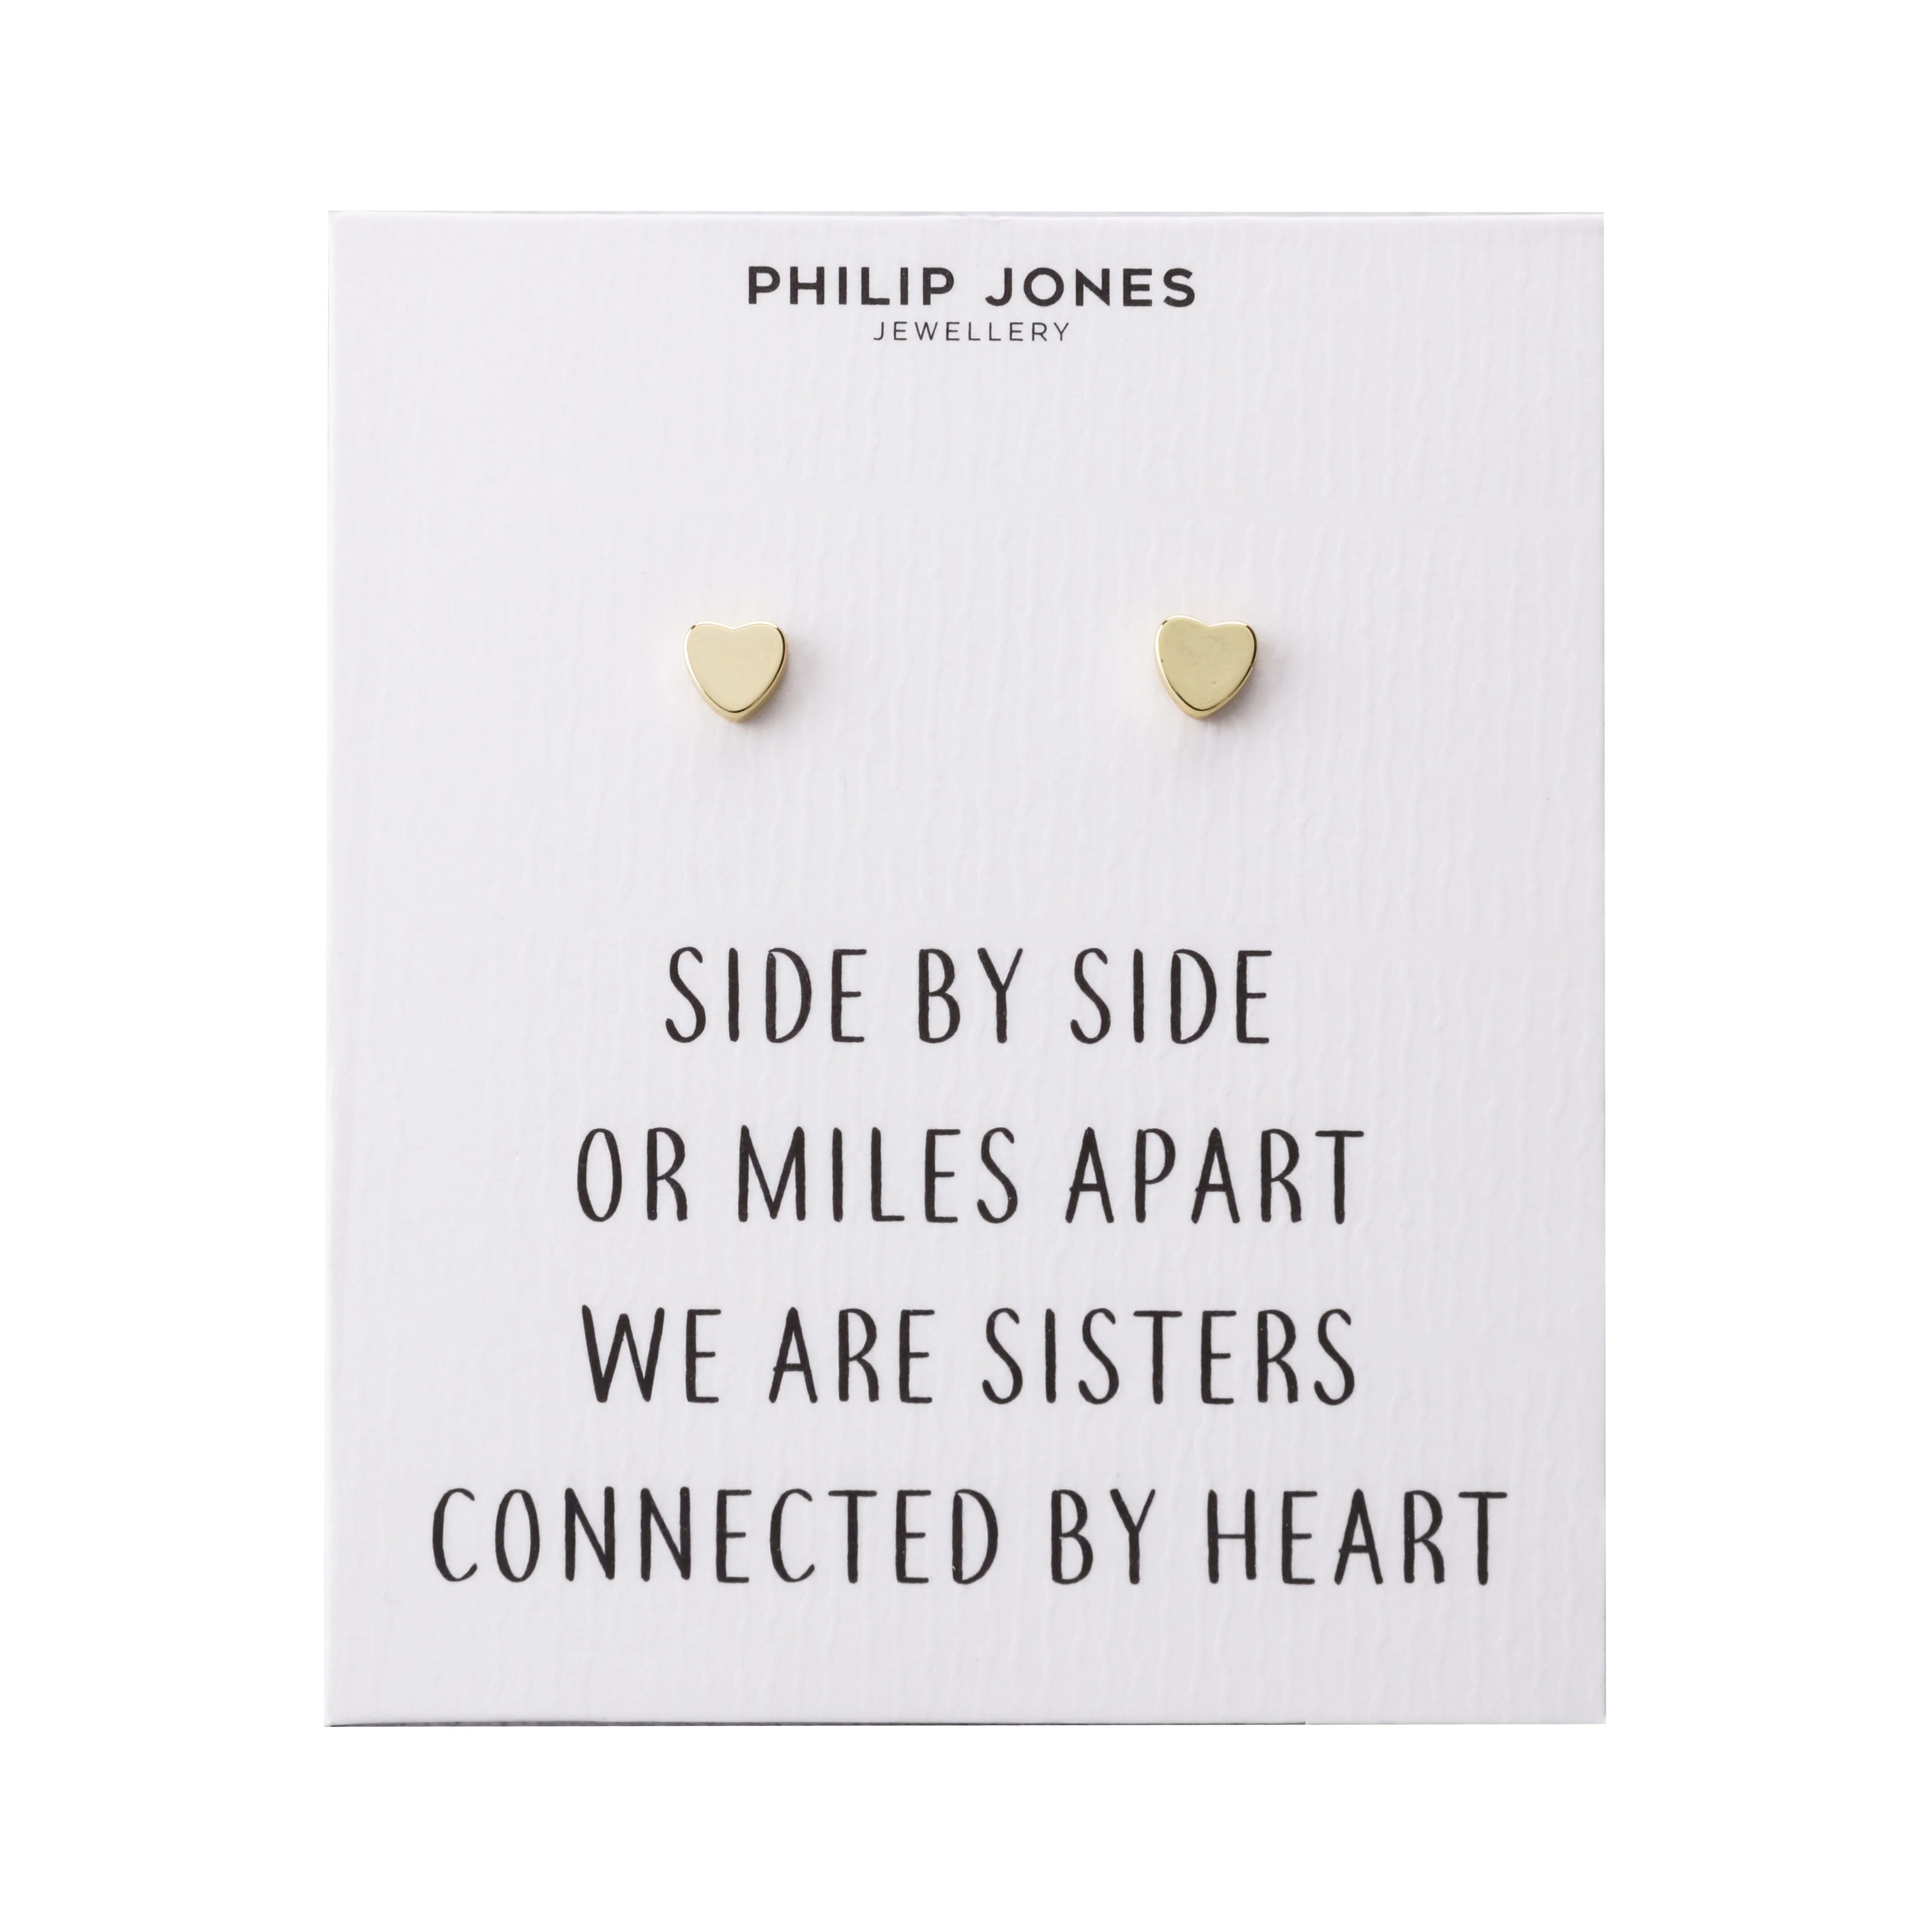 Philip Jones Jewellery Gold Plated Sister Heart Stud Earrings with Quote Card